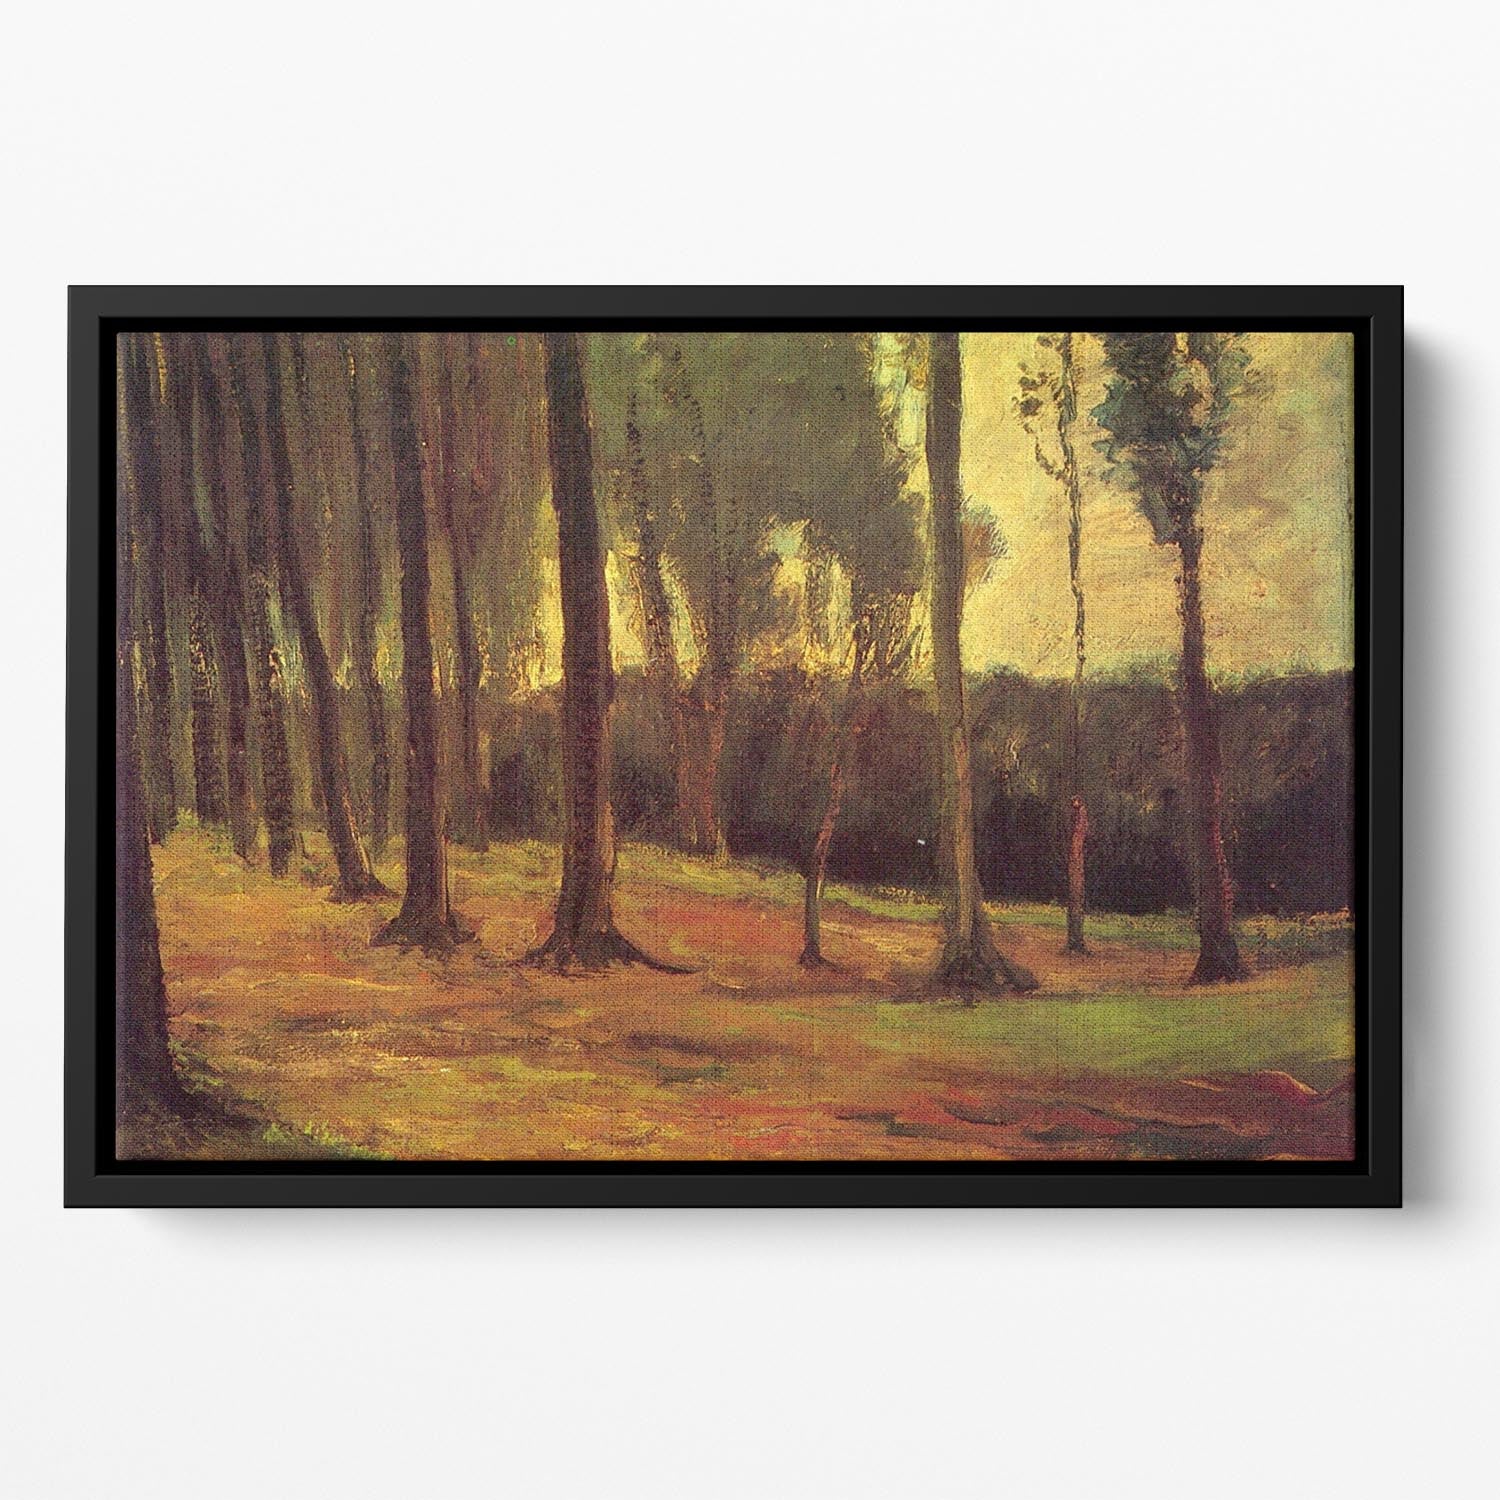 Edge of a Wood by Van Gogh Floating Framed Canvas